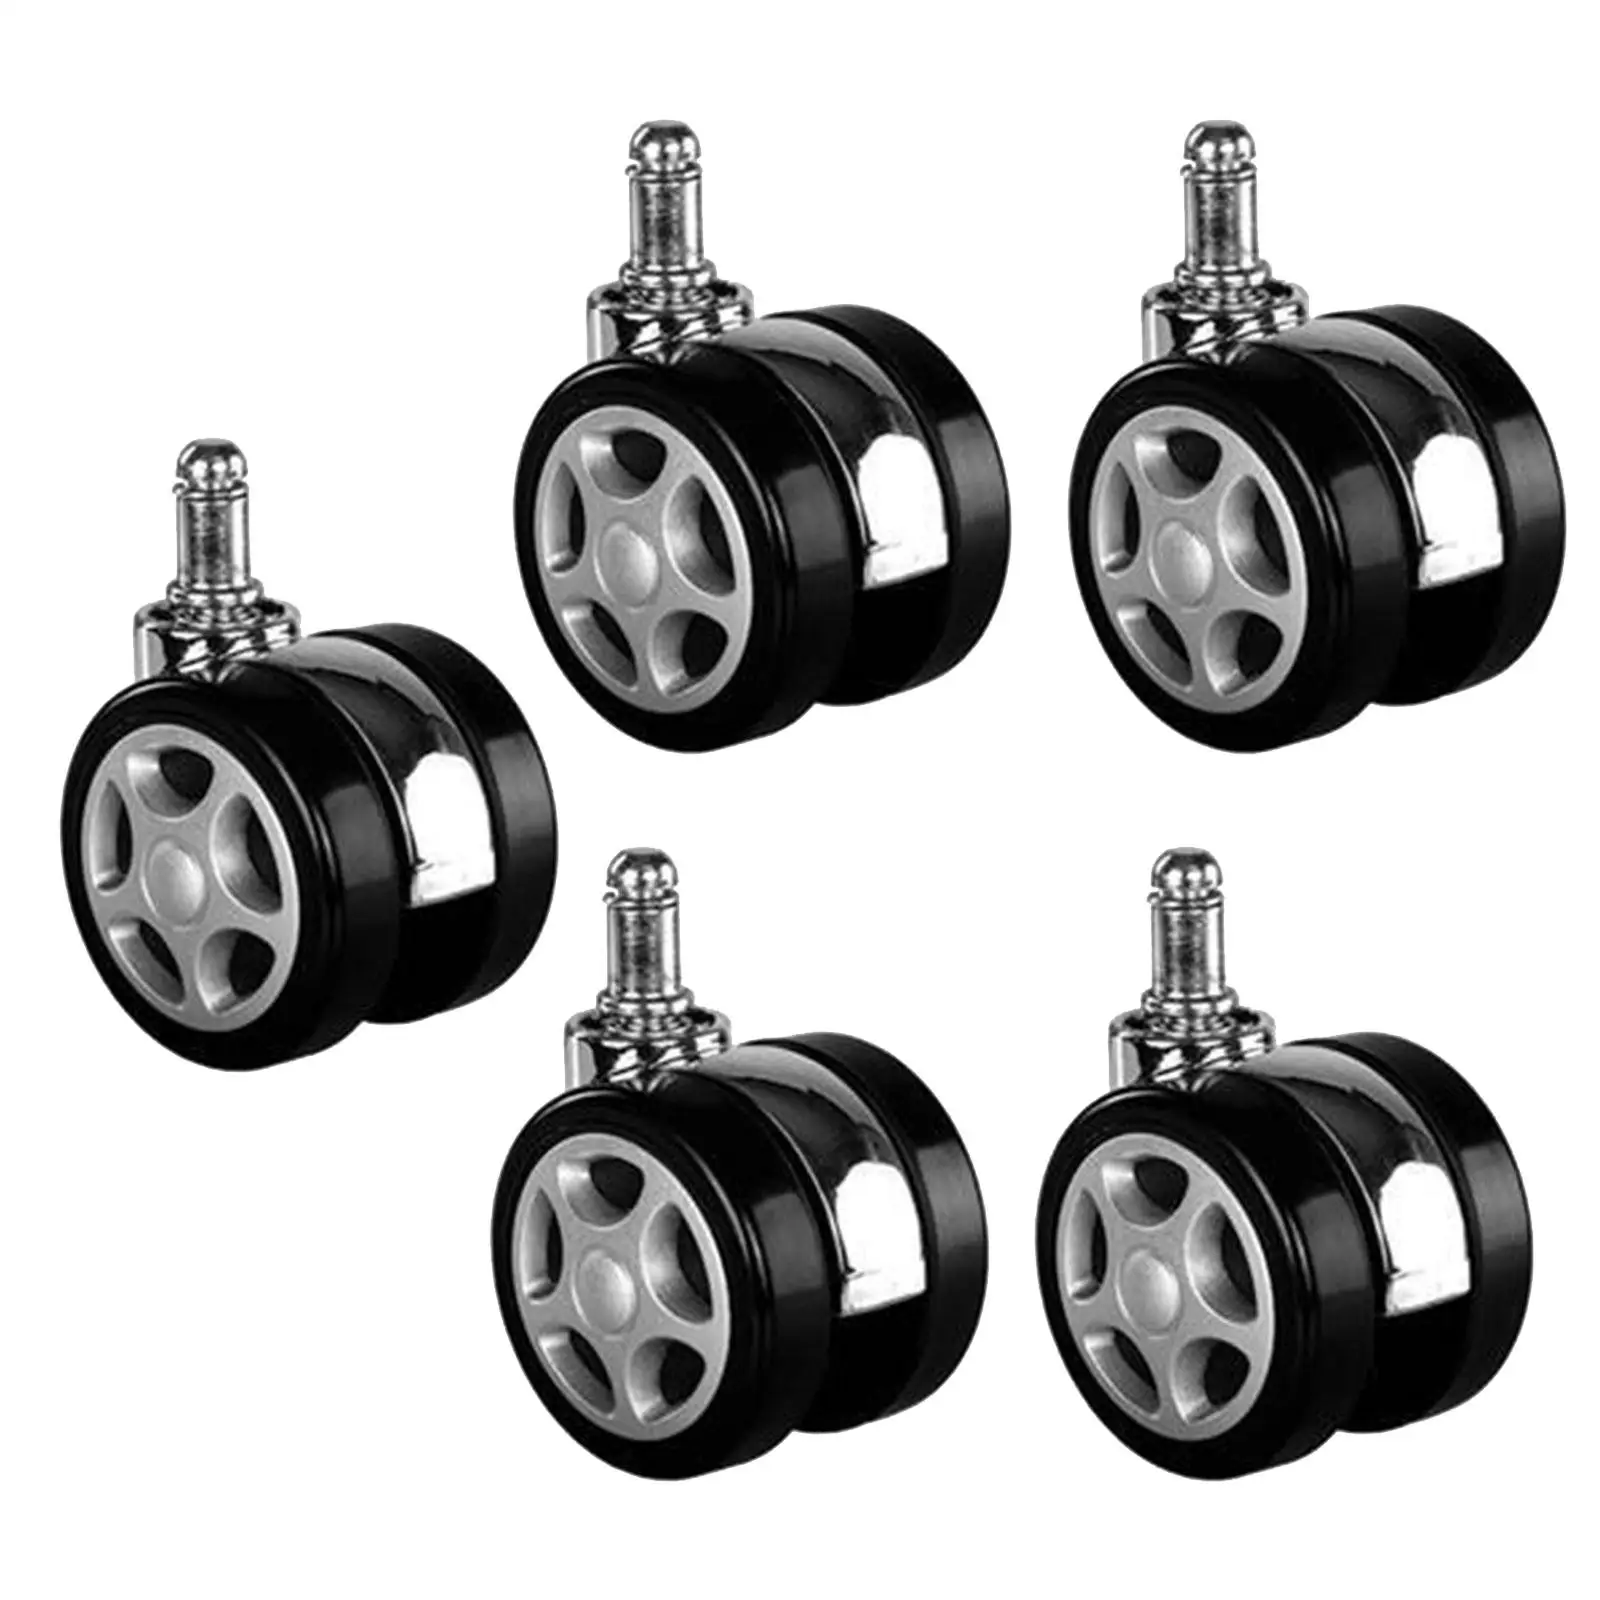 5 Pieces Office Chair Caster Wheels Heavy Duty Replacement Chair Casters